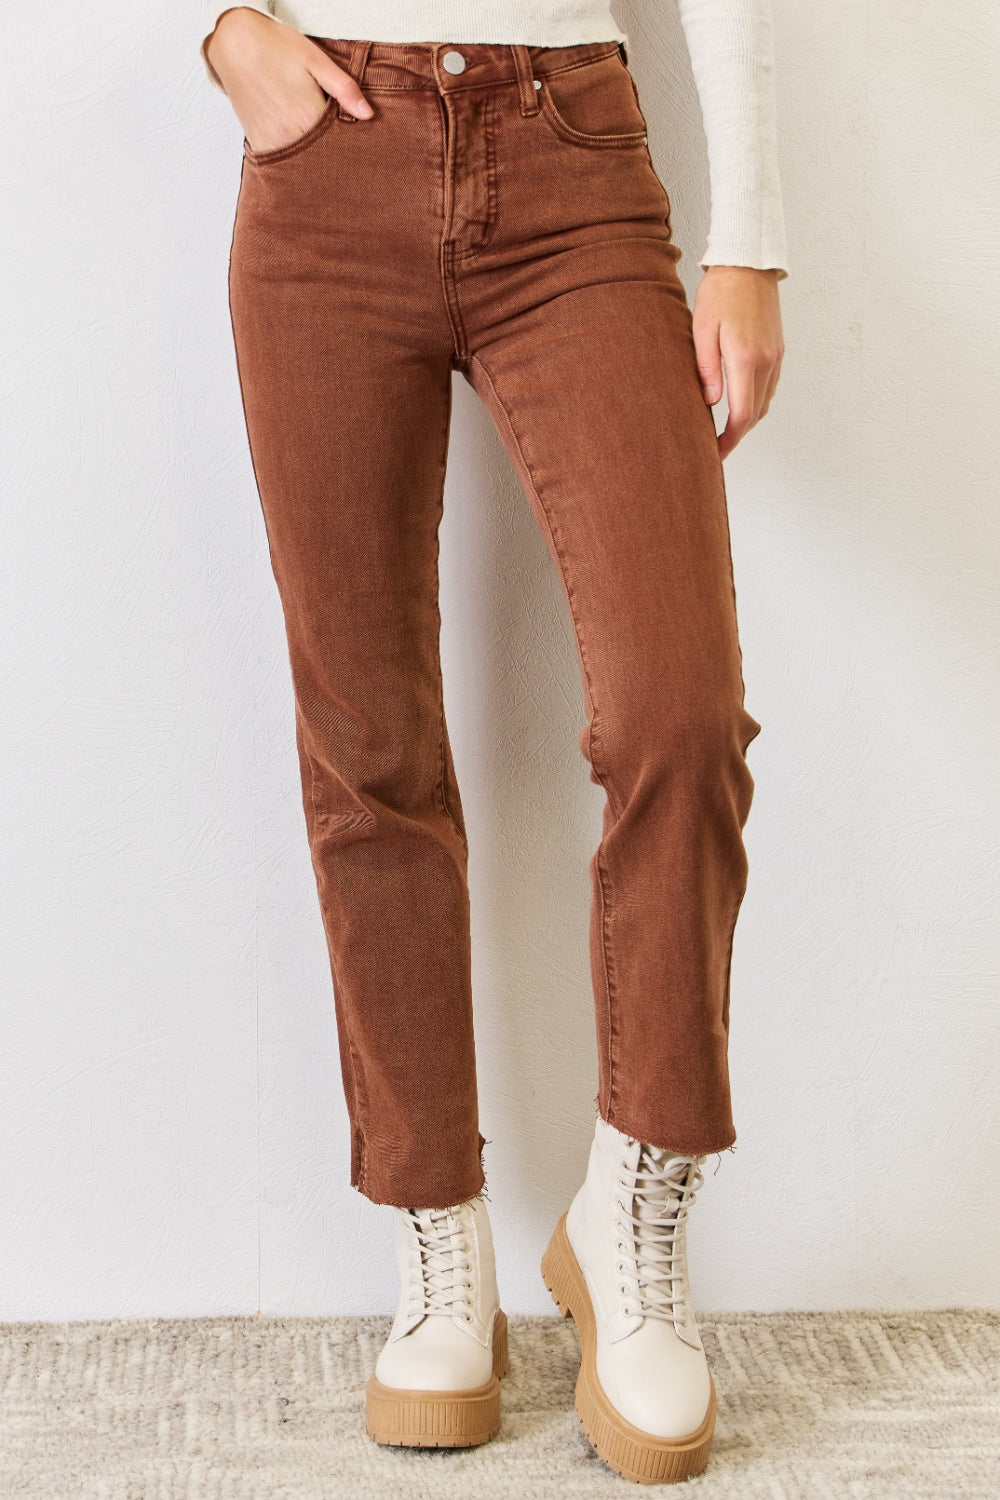 Espresso High Rise Tummy Control Straight Jeans by Risen - Wildly Max